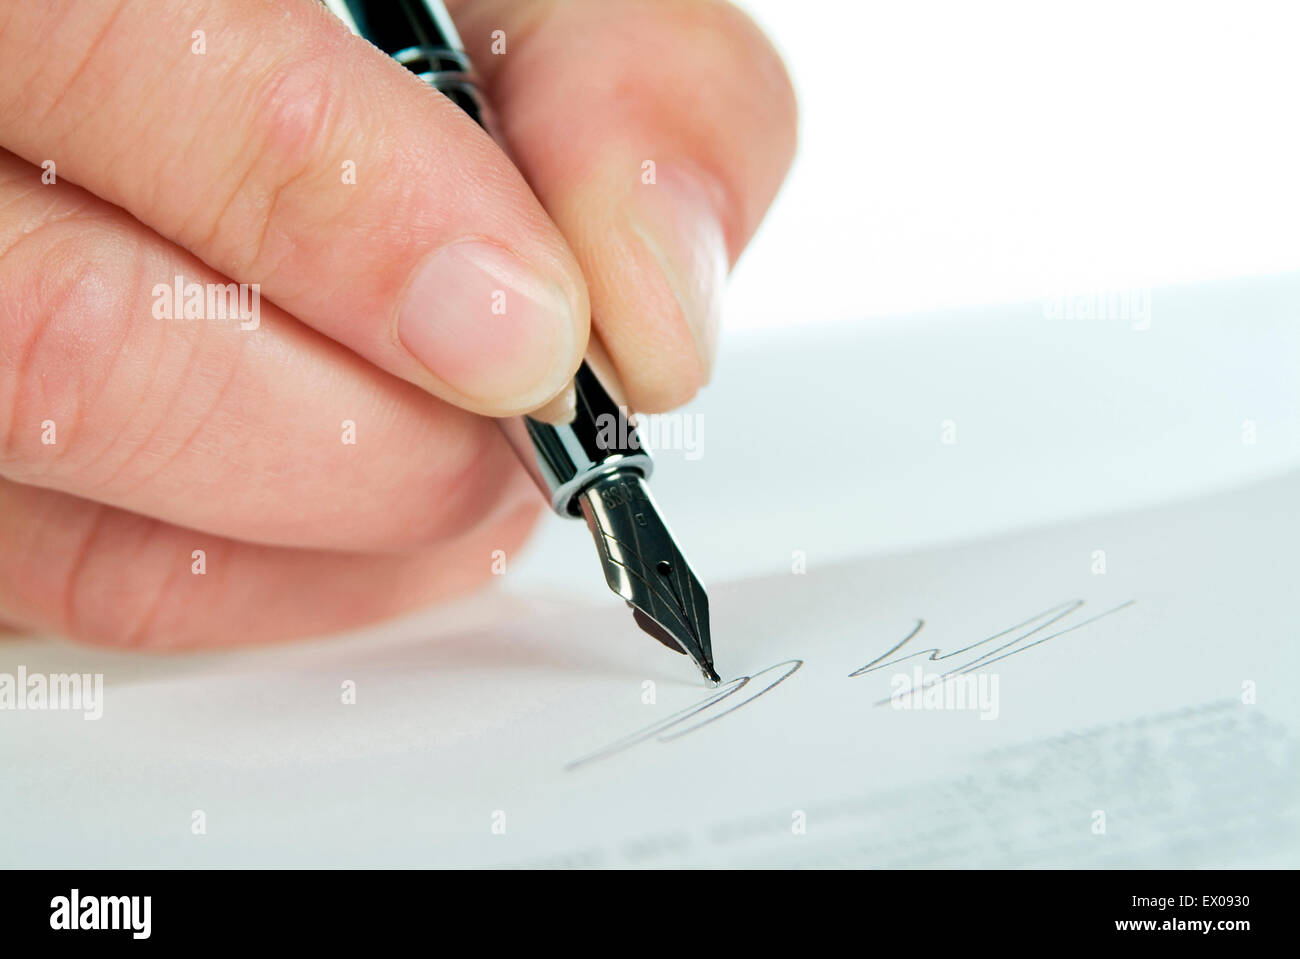 Signing a contract as close up. Stock Photo